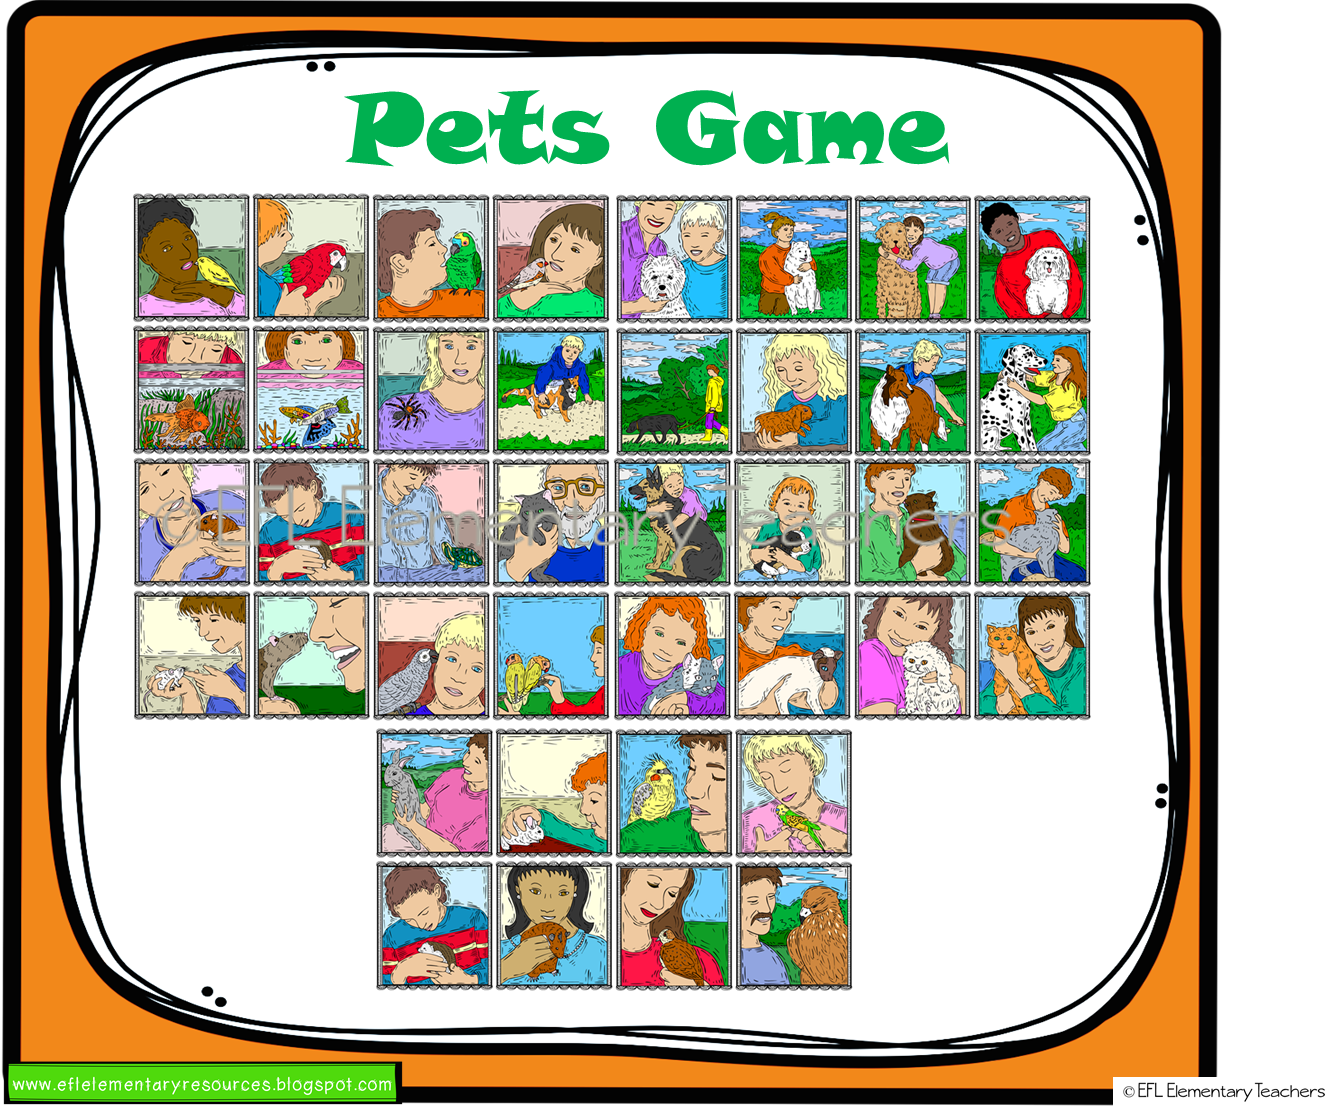 Teacher's Pets игра. Guess who game Pets. Guess who game ESL. Teacher Pets игра арты. Whose gaming now